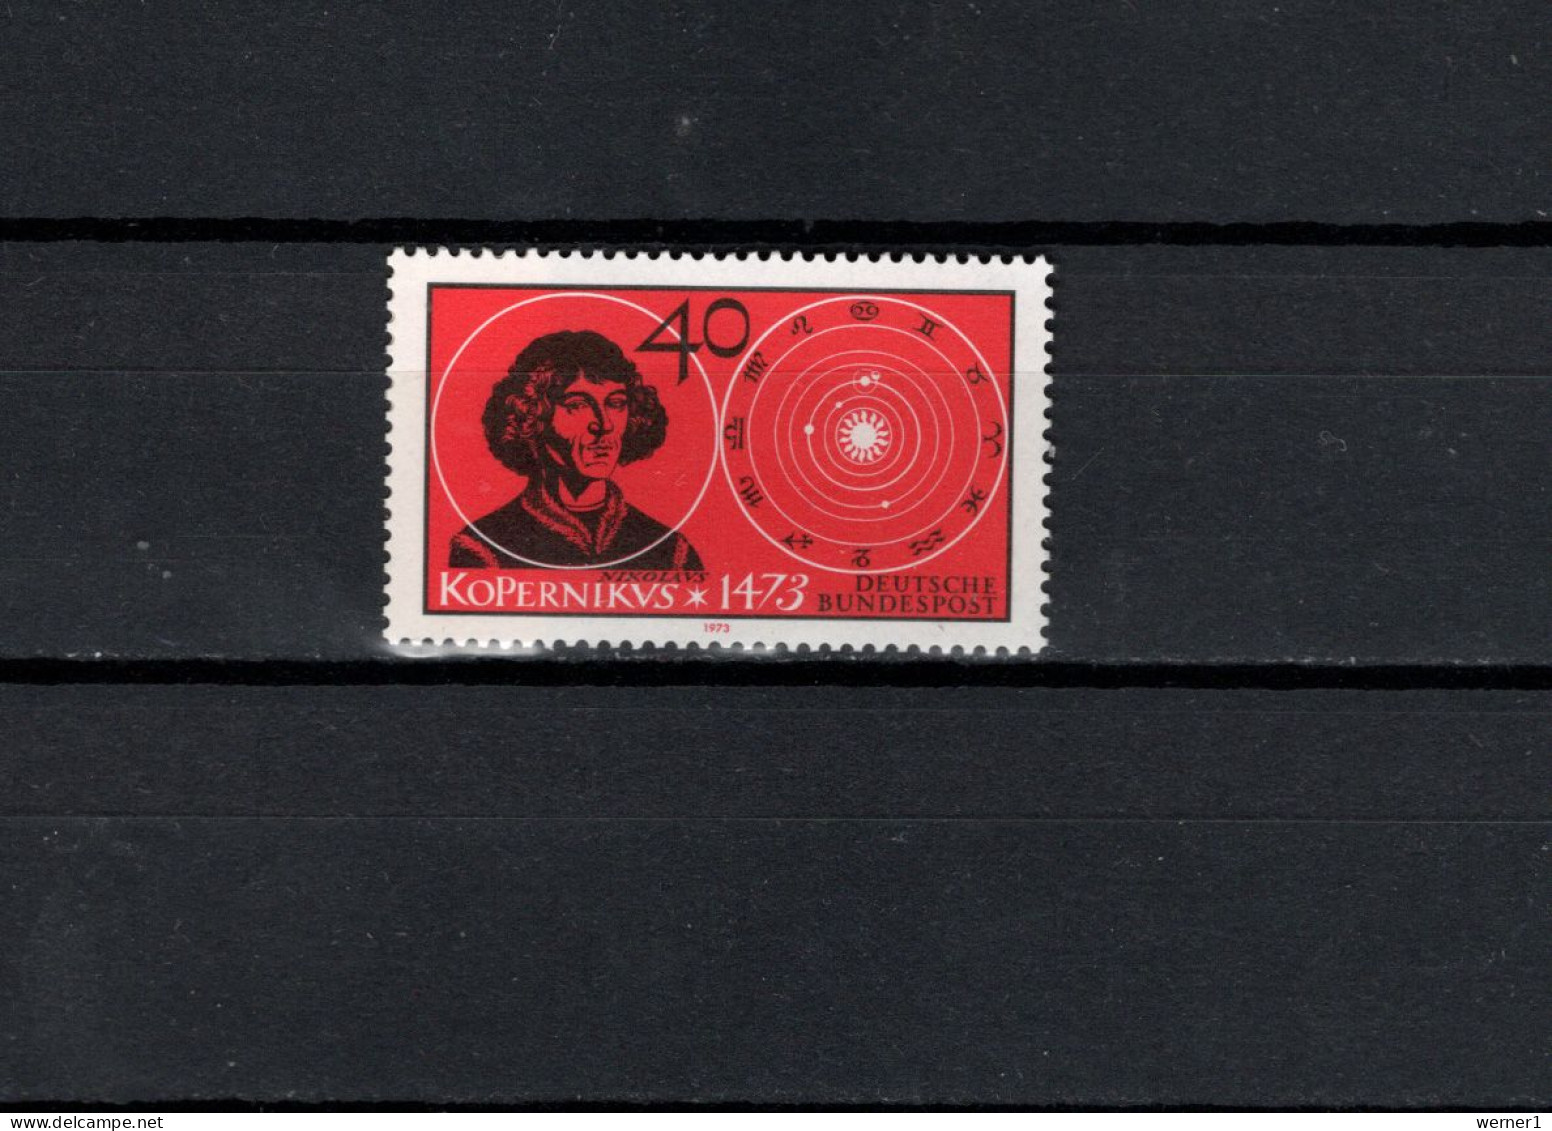 Germany 1973 Space, Copernicus Stamp MNH - Europa